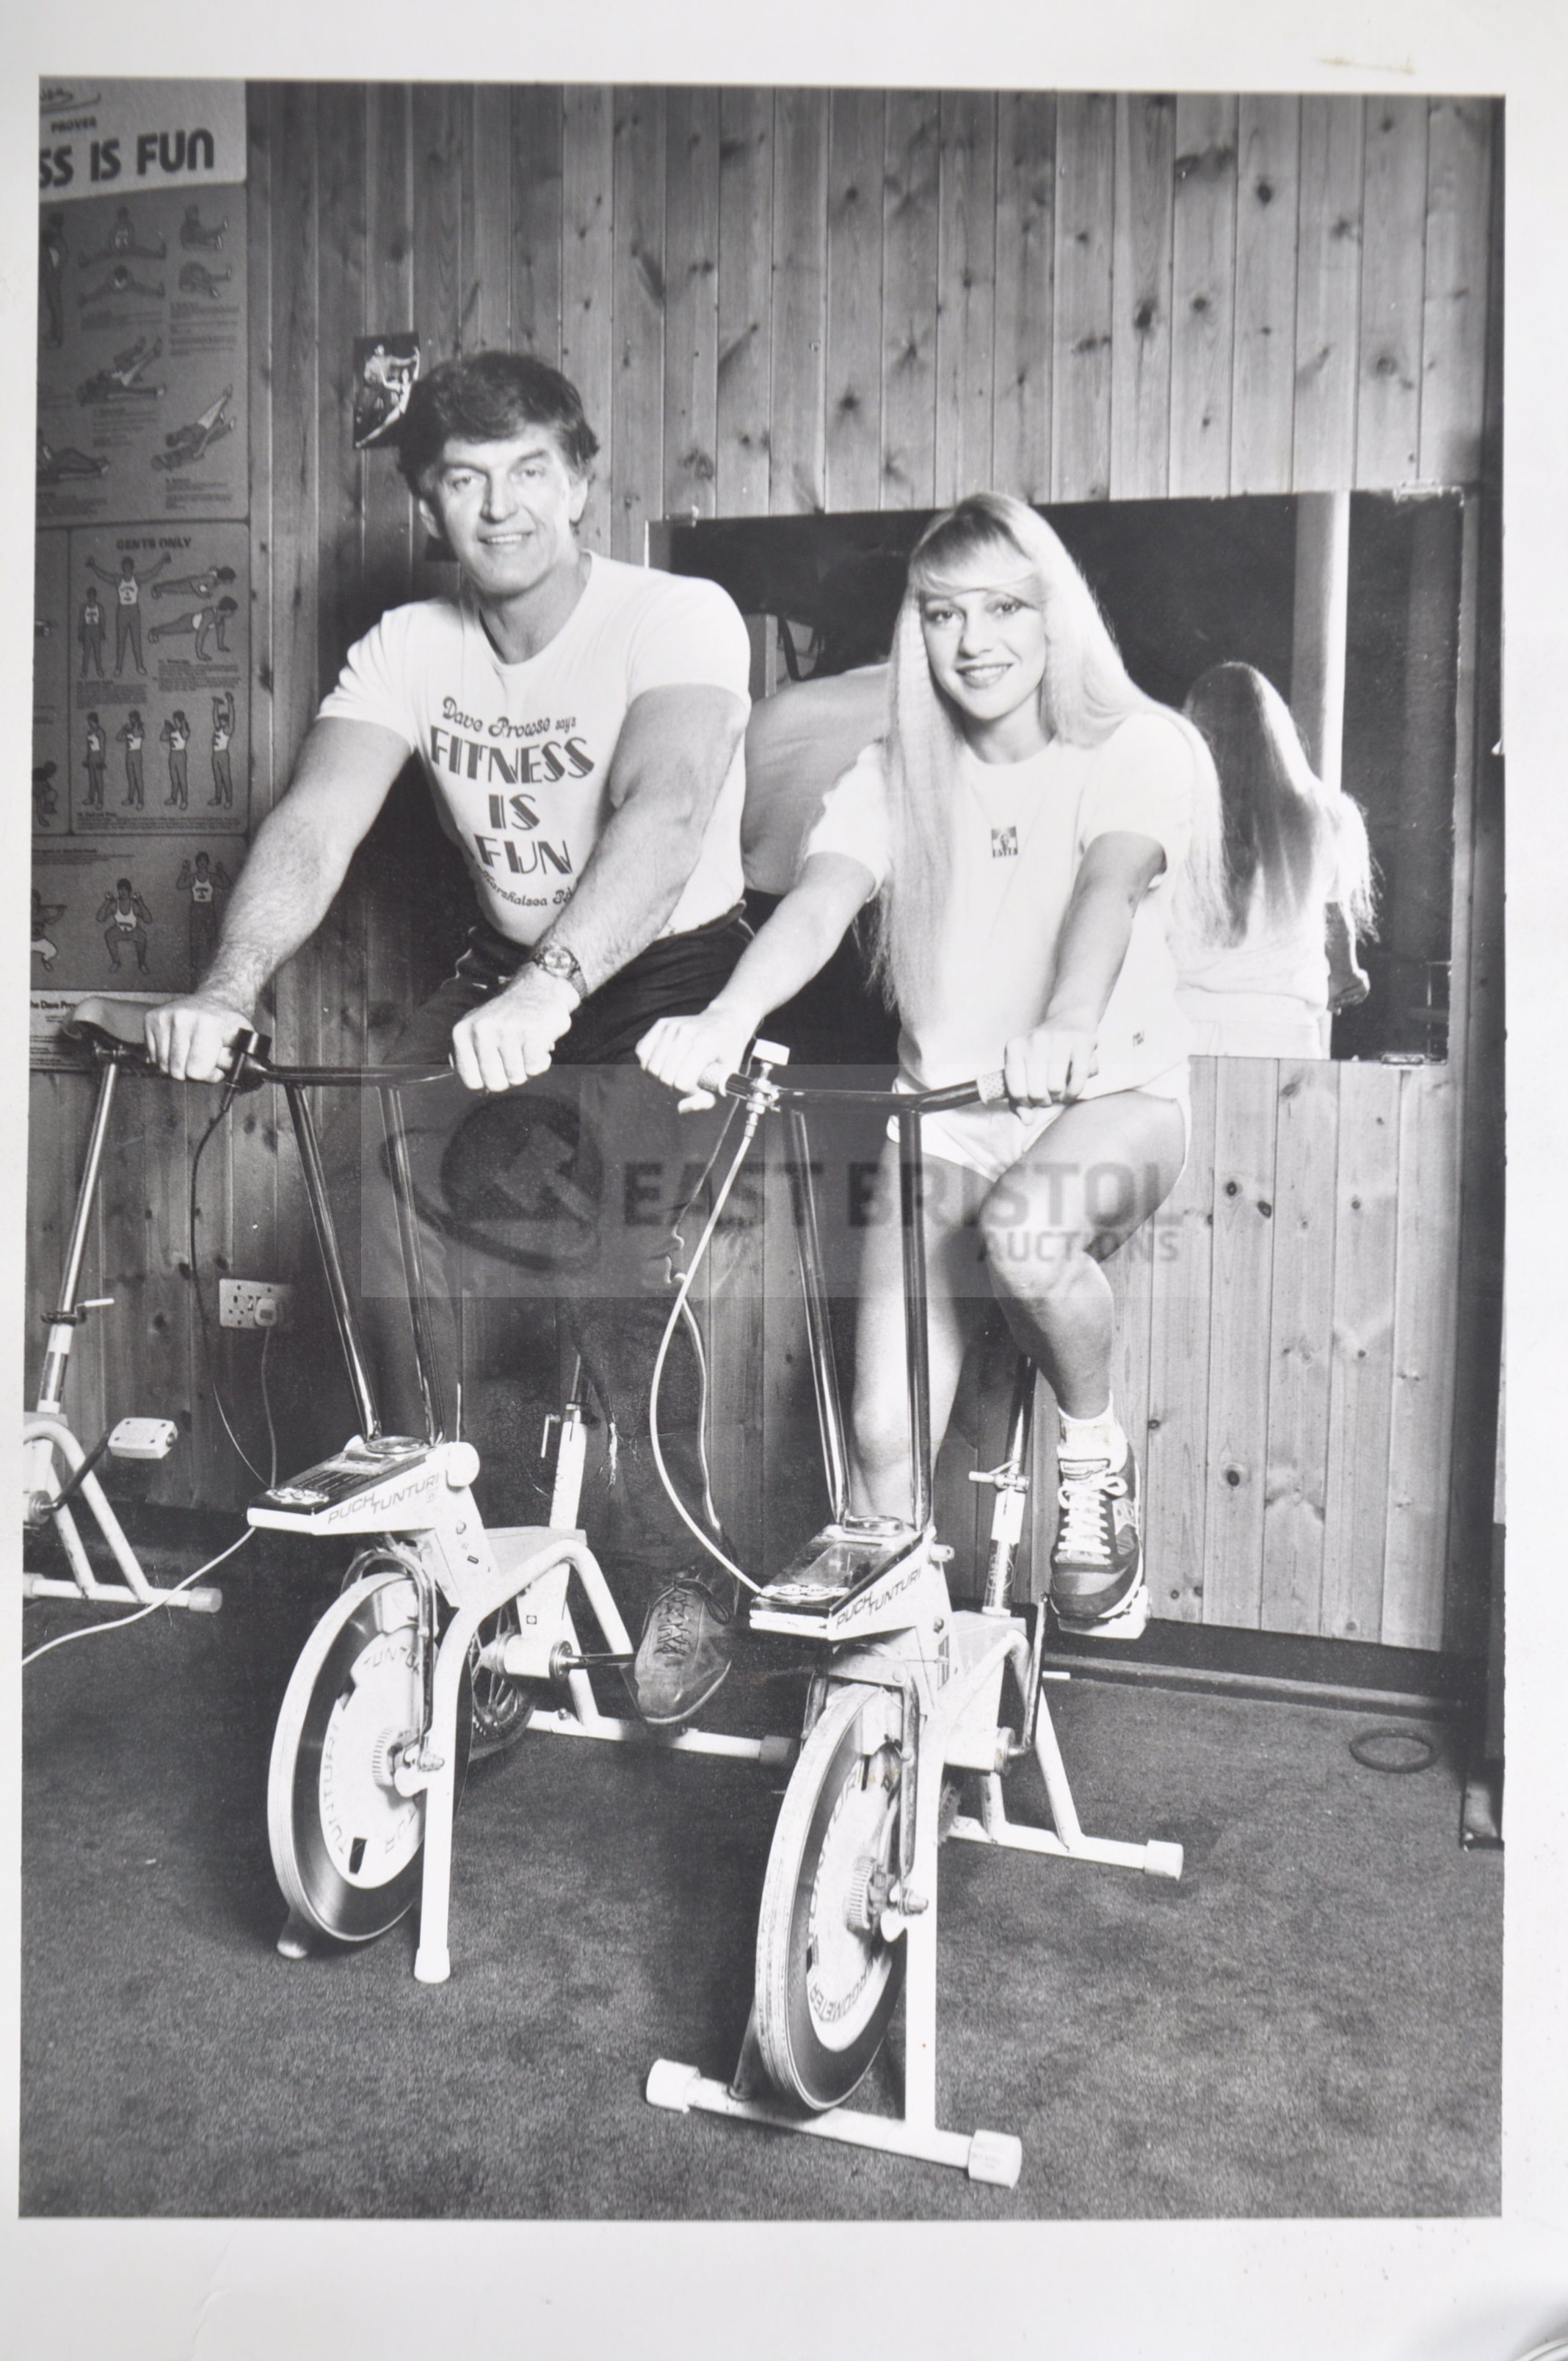 ESTATE OF DAVE PROWSE - ORIGINAL STAR GYM PROMOTIONAL PHOTOS - Image 2 of 4